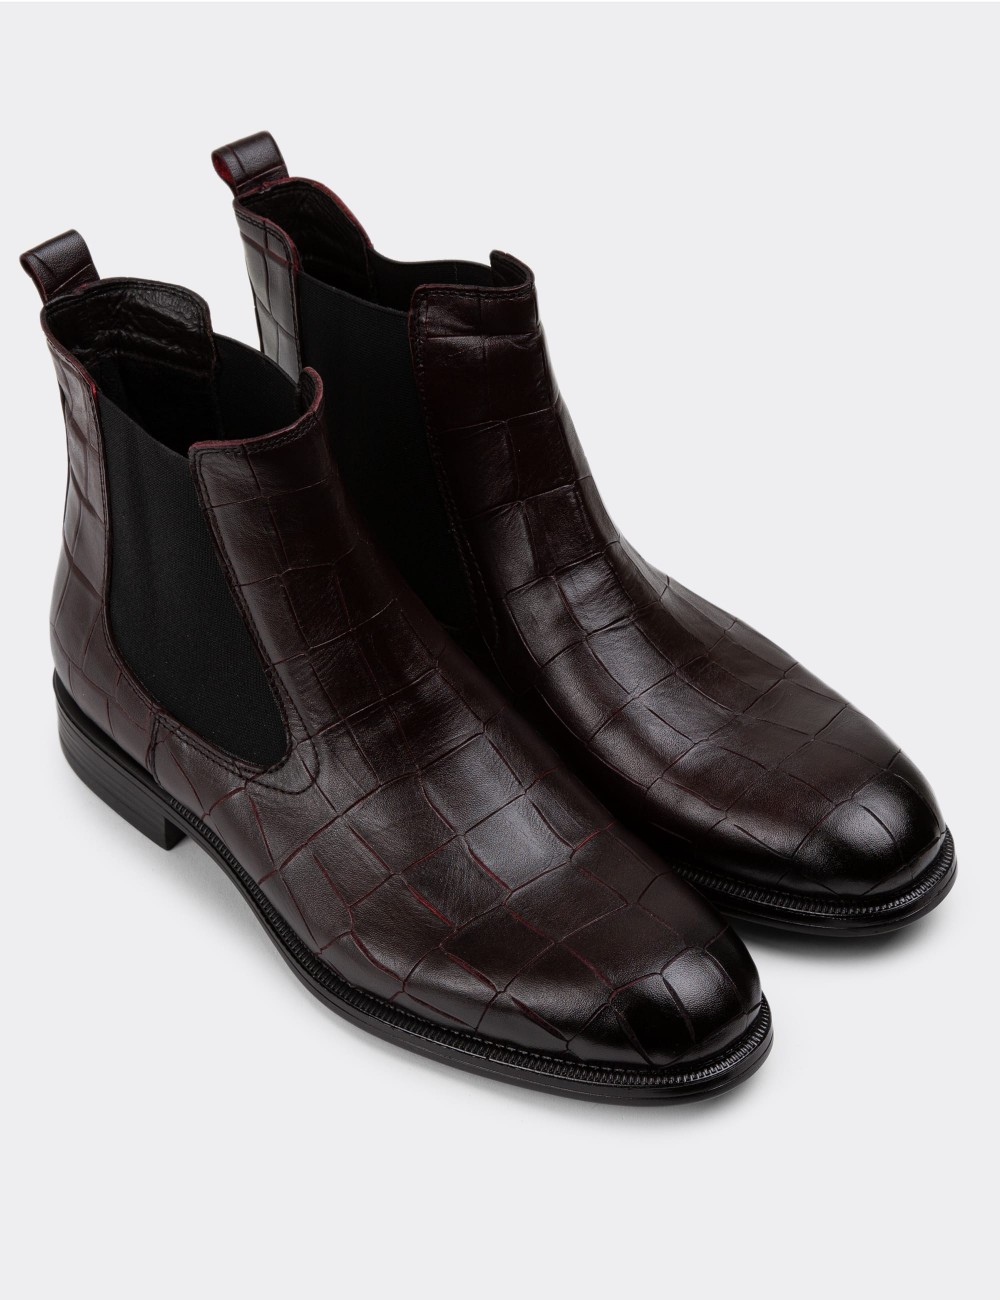 Burgundy Leather Chelsea Boots - 01919MBRDC01